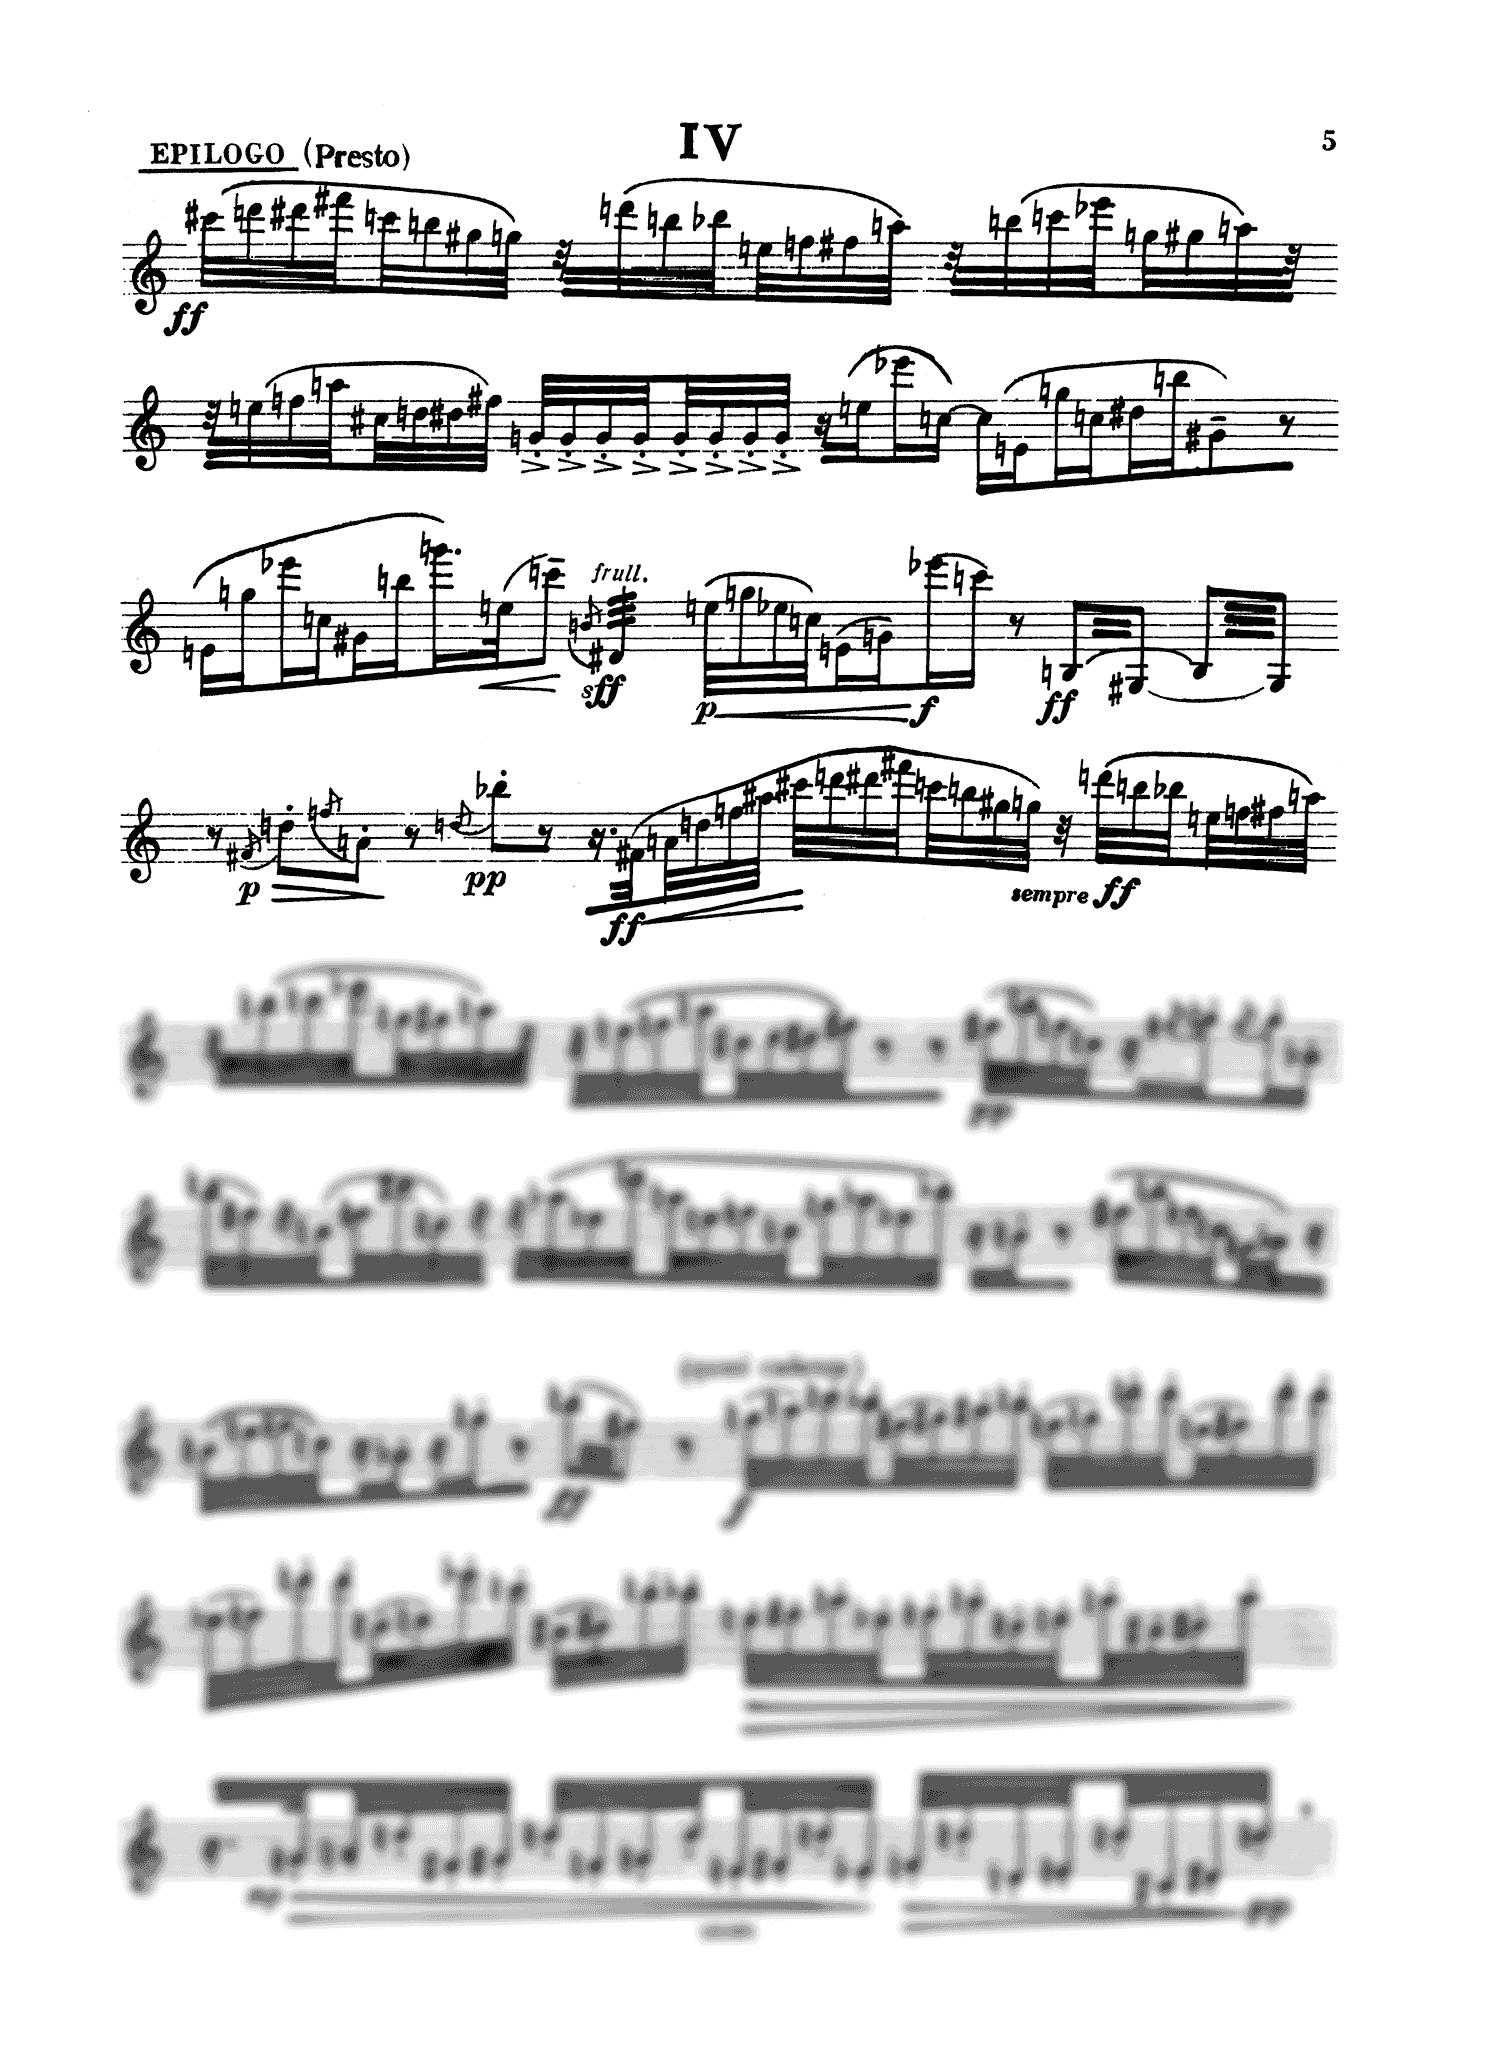 Bucchi Concert for solo clarinet - Movement 4